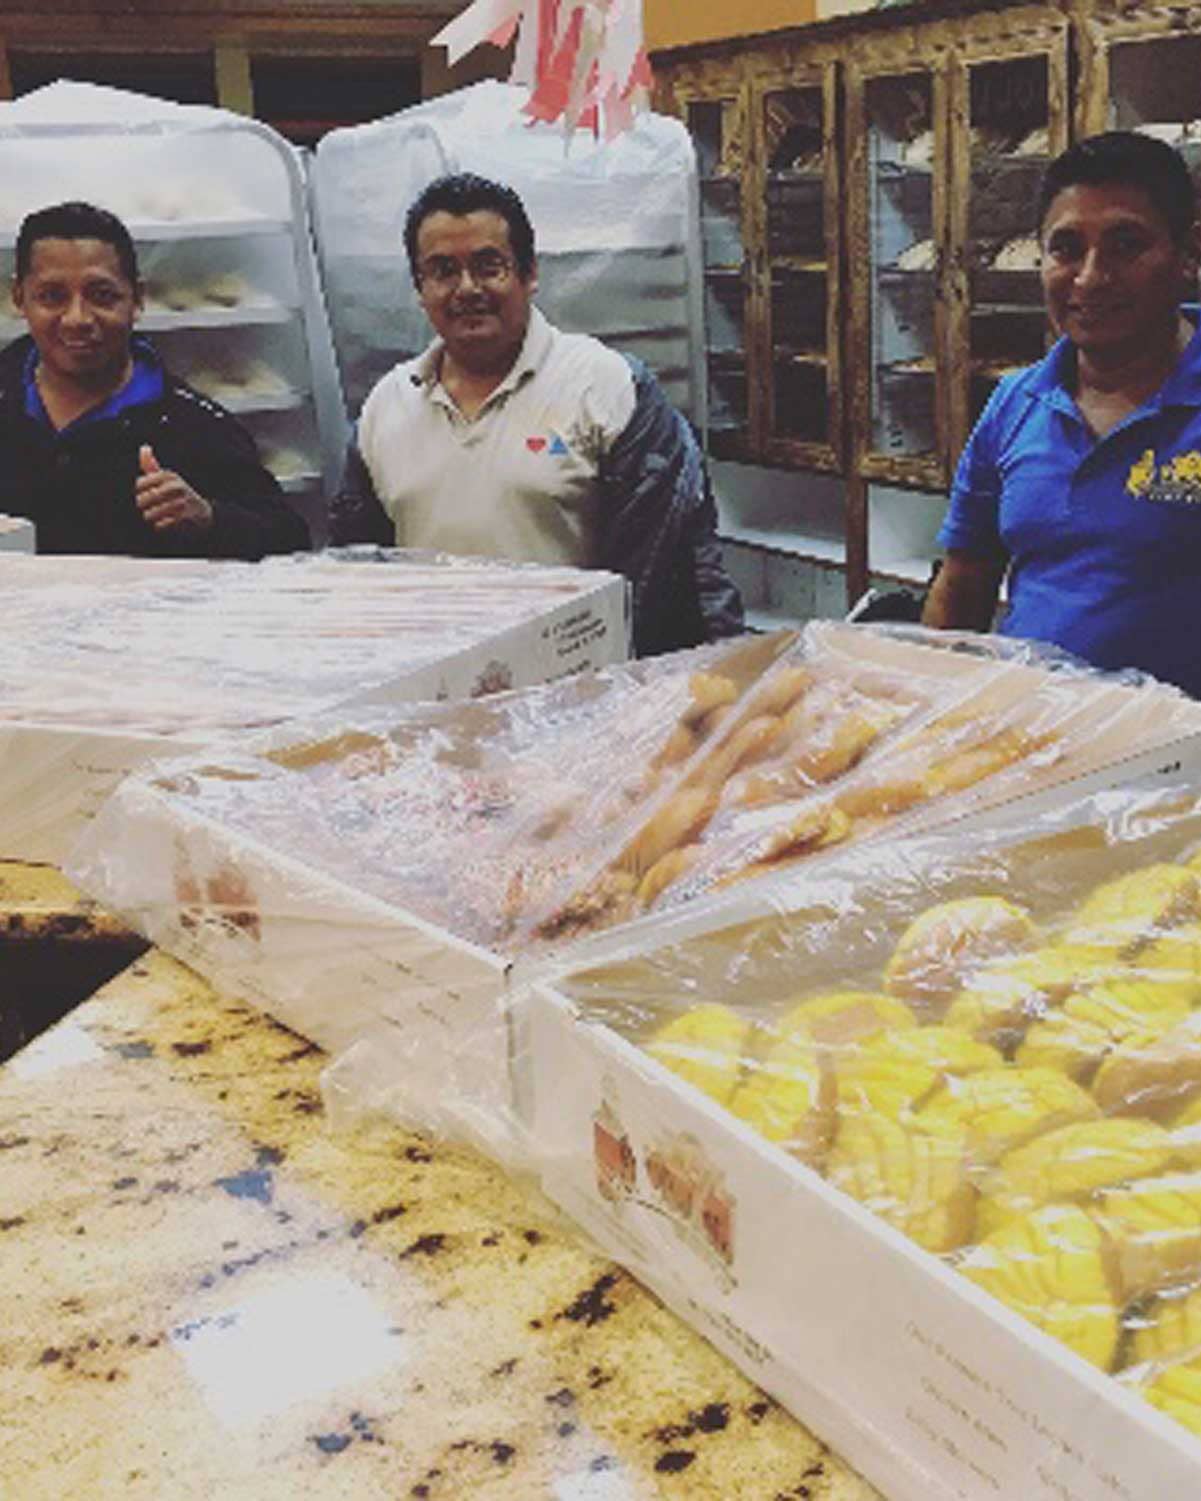 Trapped By Hurricane Harvey, These Bakers Made Thousands of Pan Dulce Loaves For Those in Need